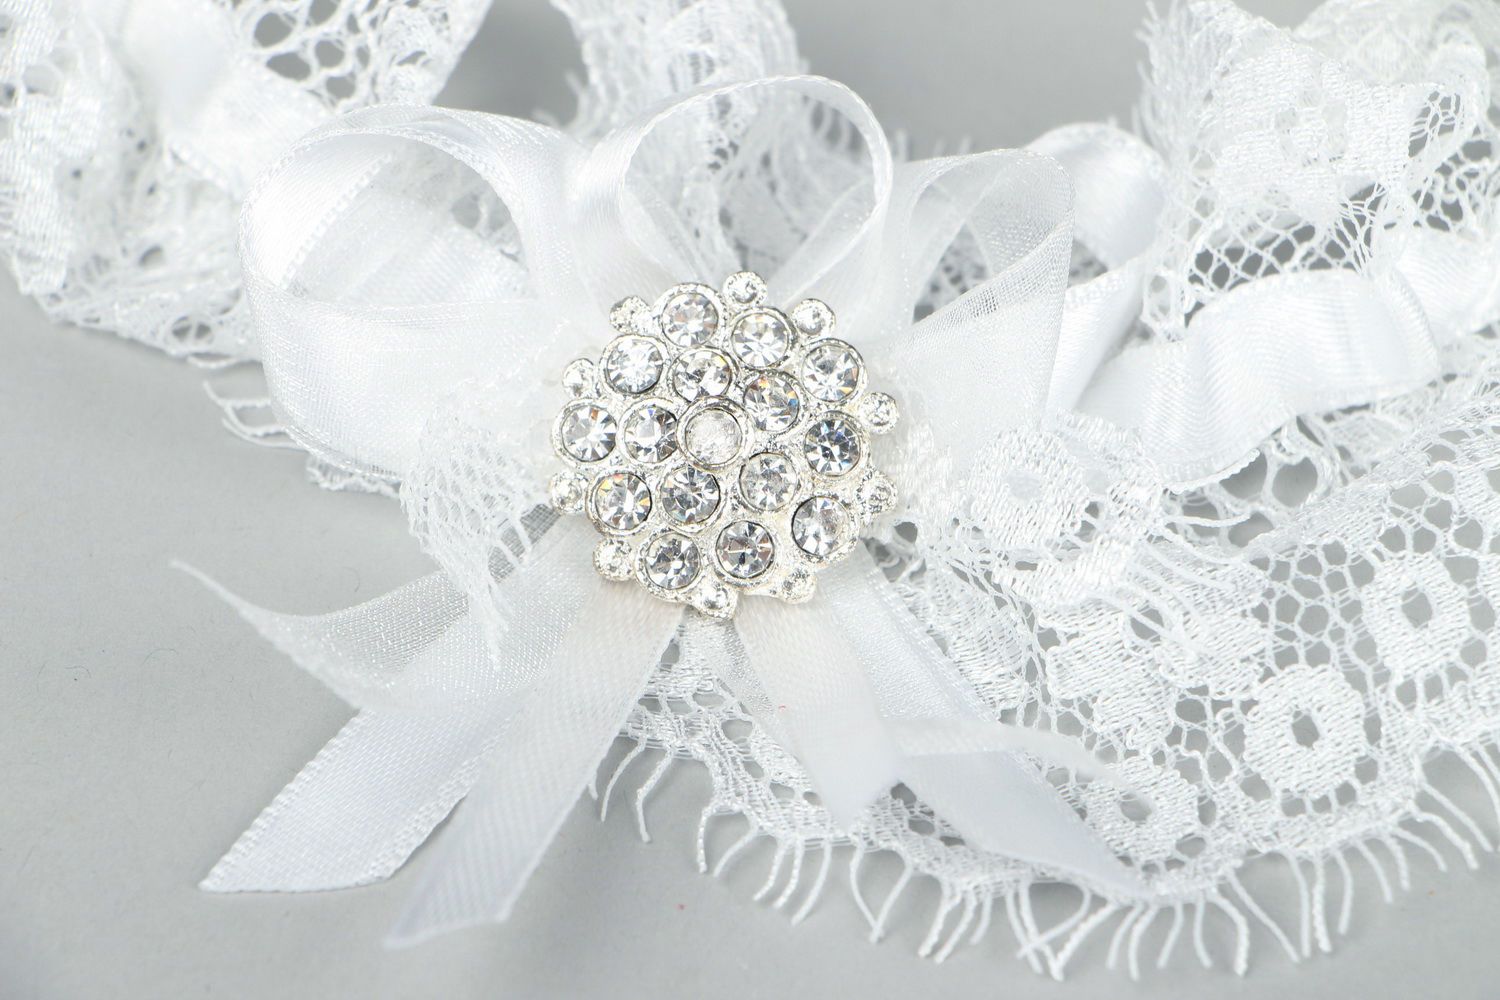 Lace garter for bride photo 2